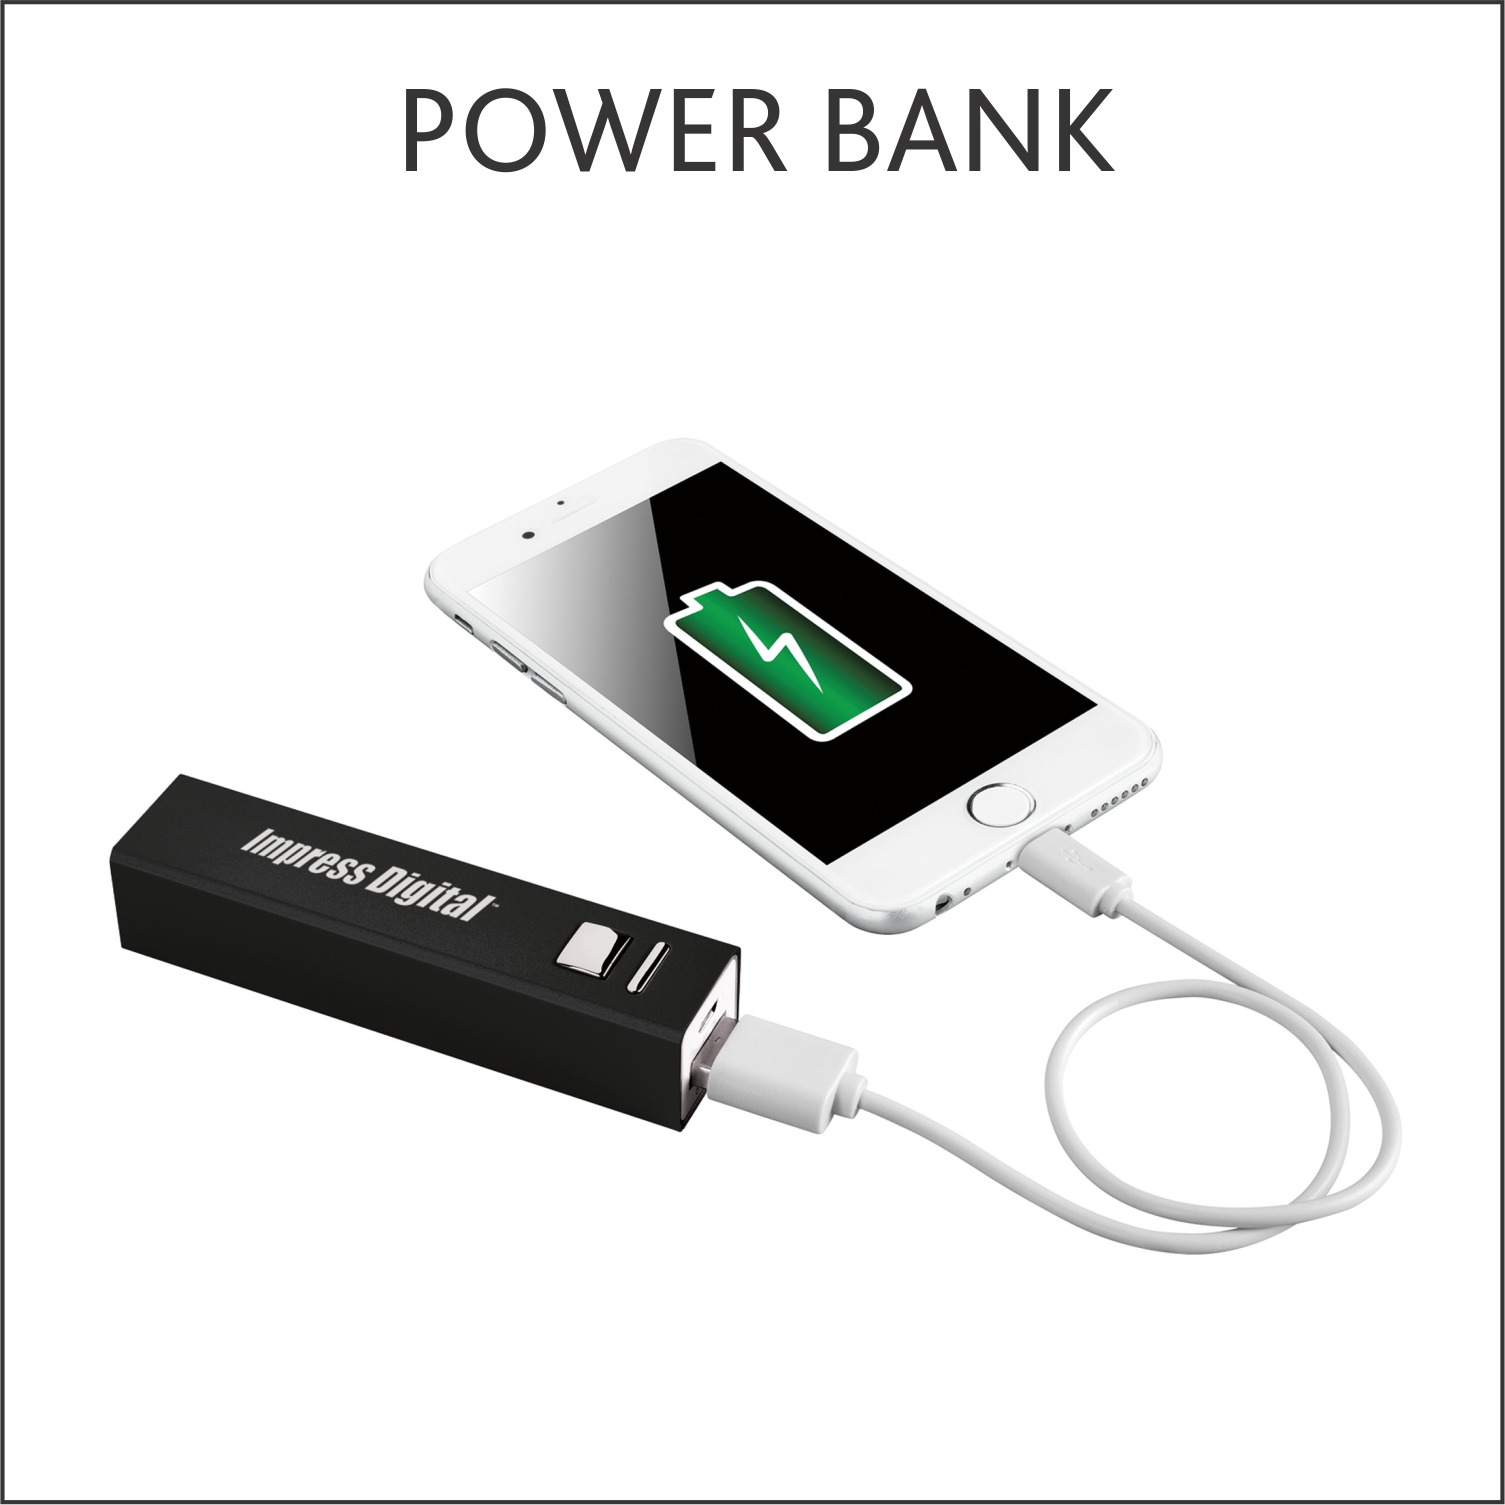 POWER BANK.png